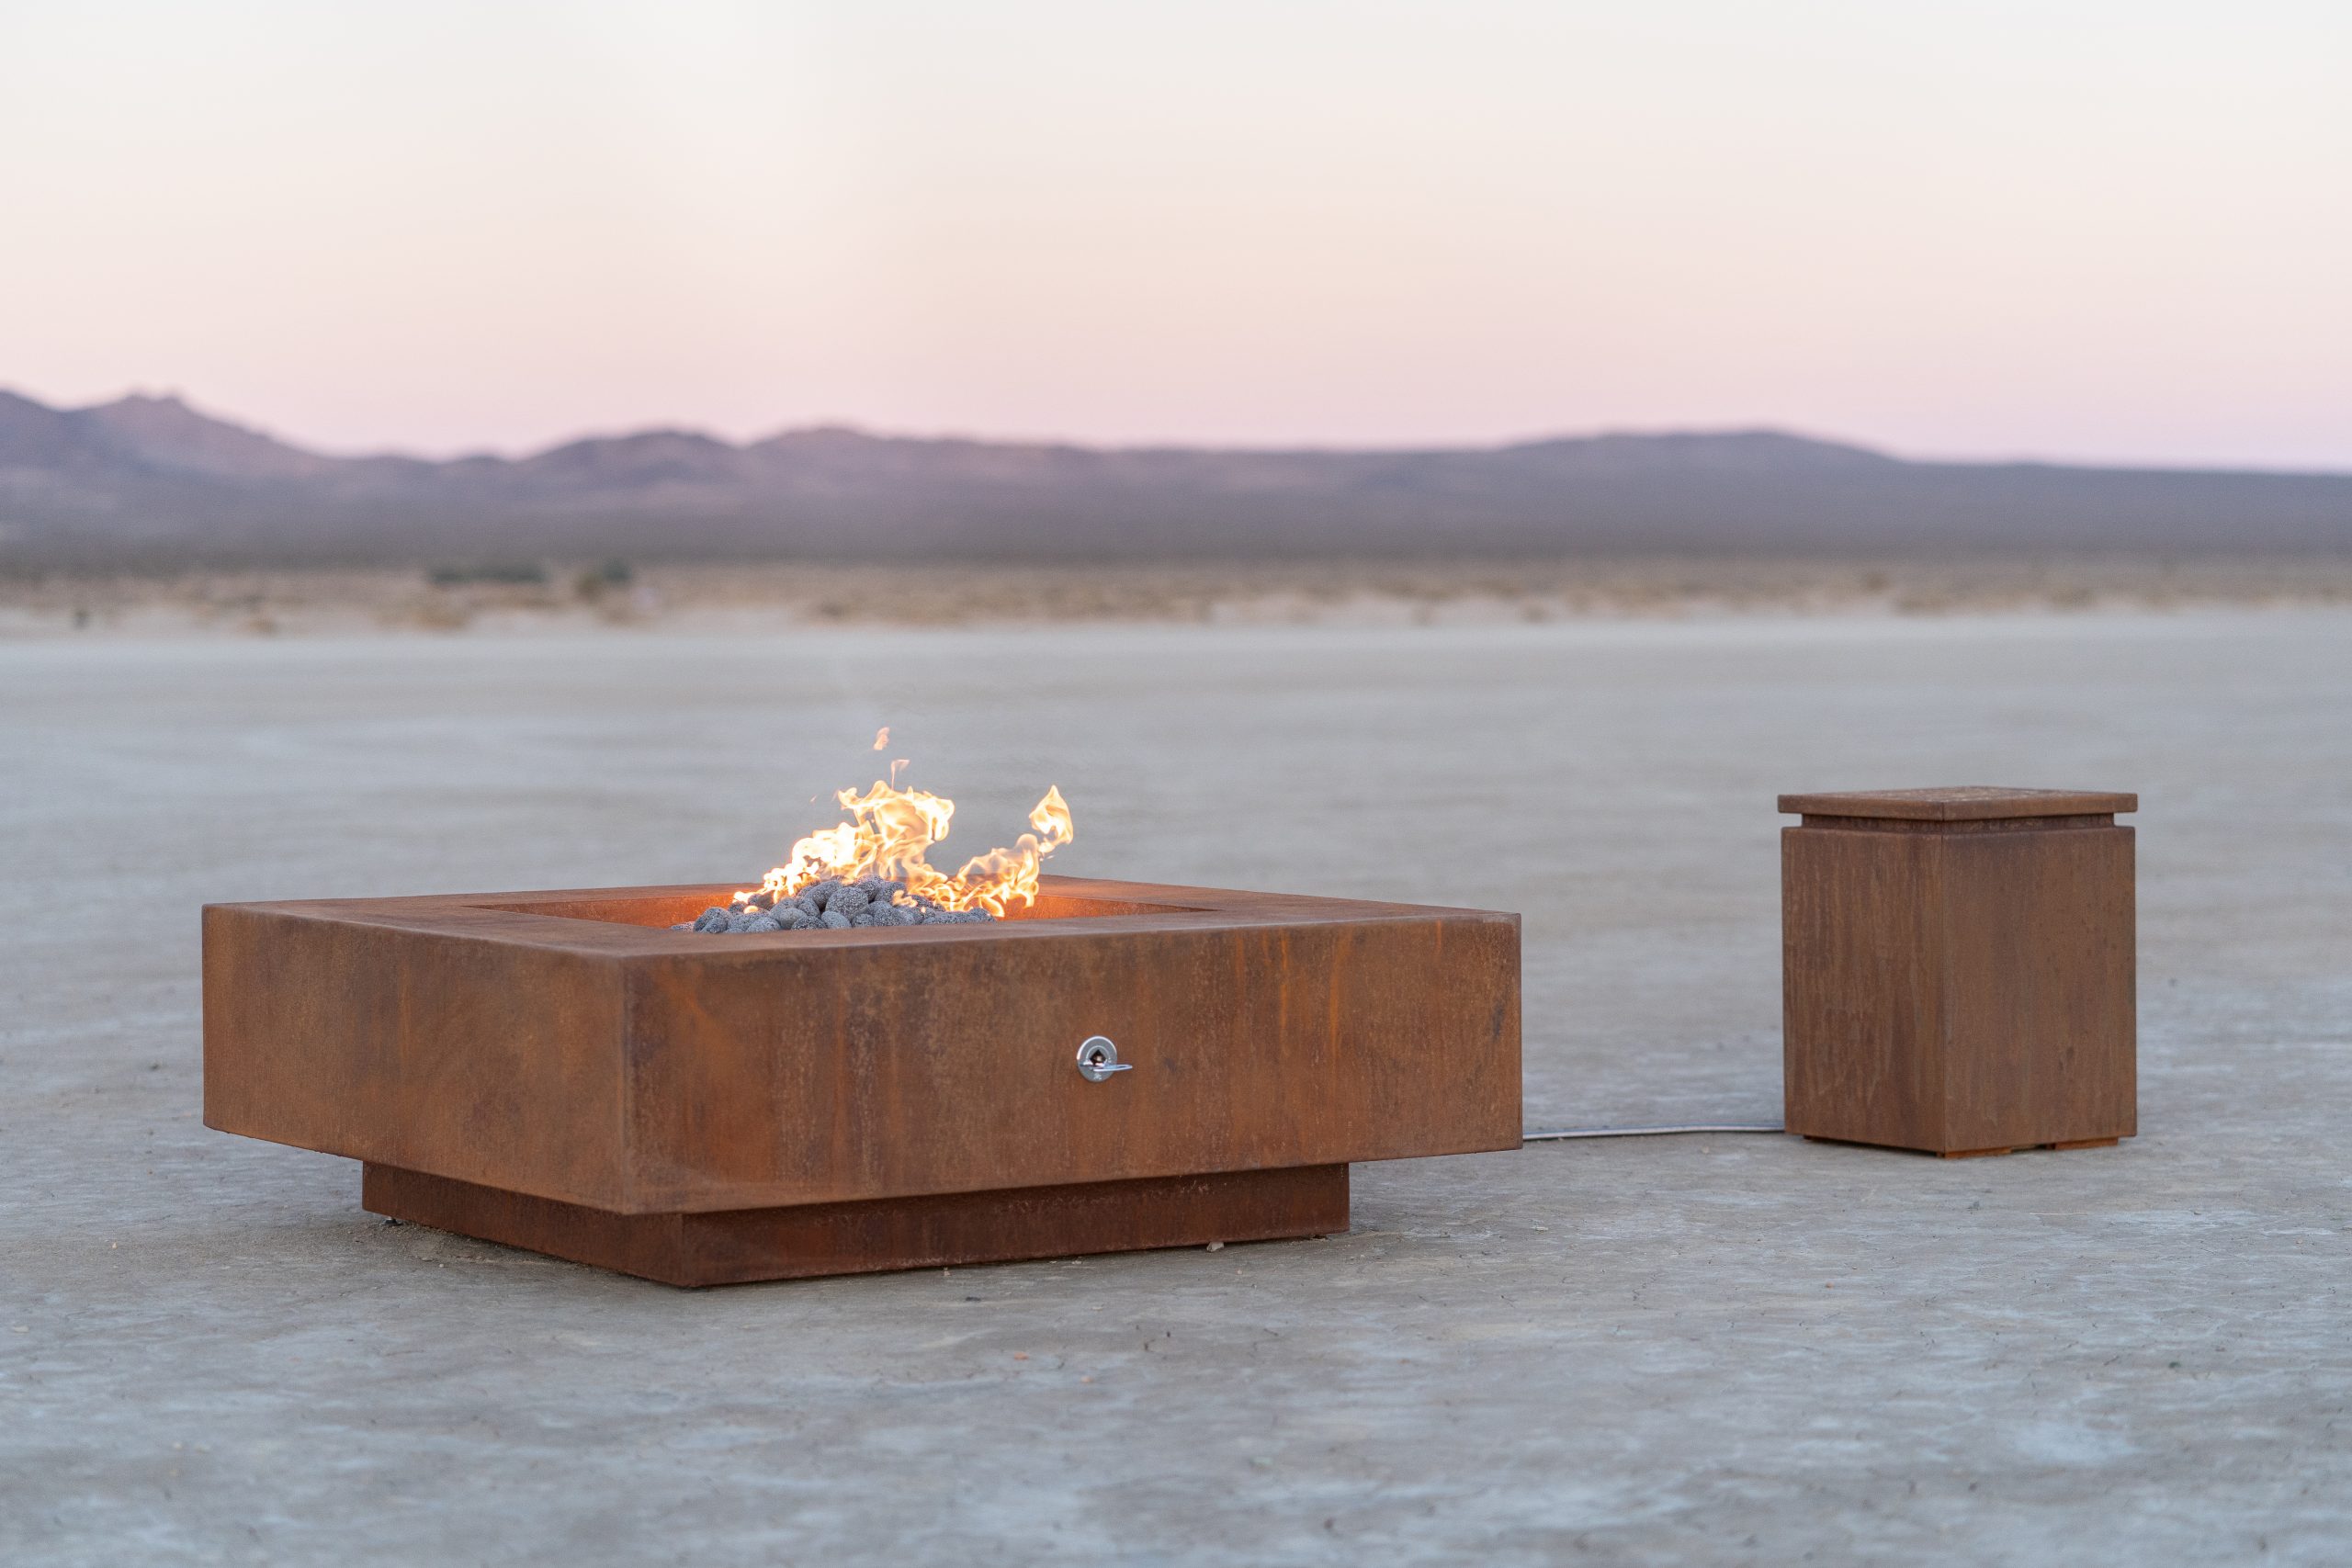 Cabo Square Metal Fire Pit The, 48 Fire Pit